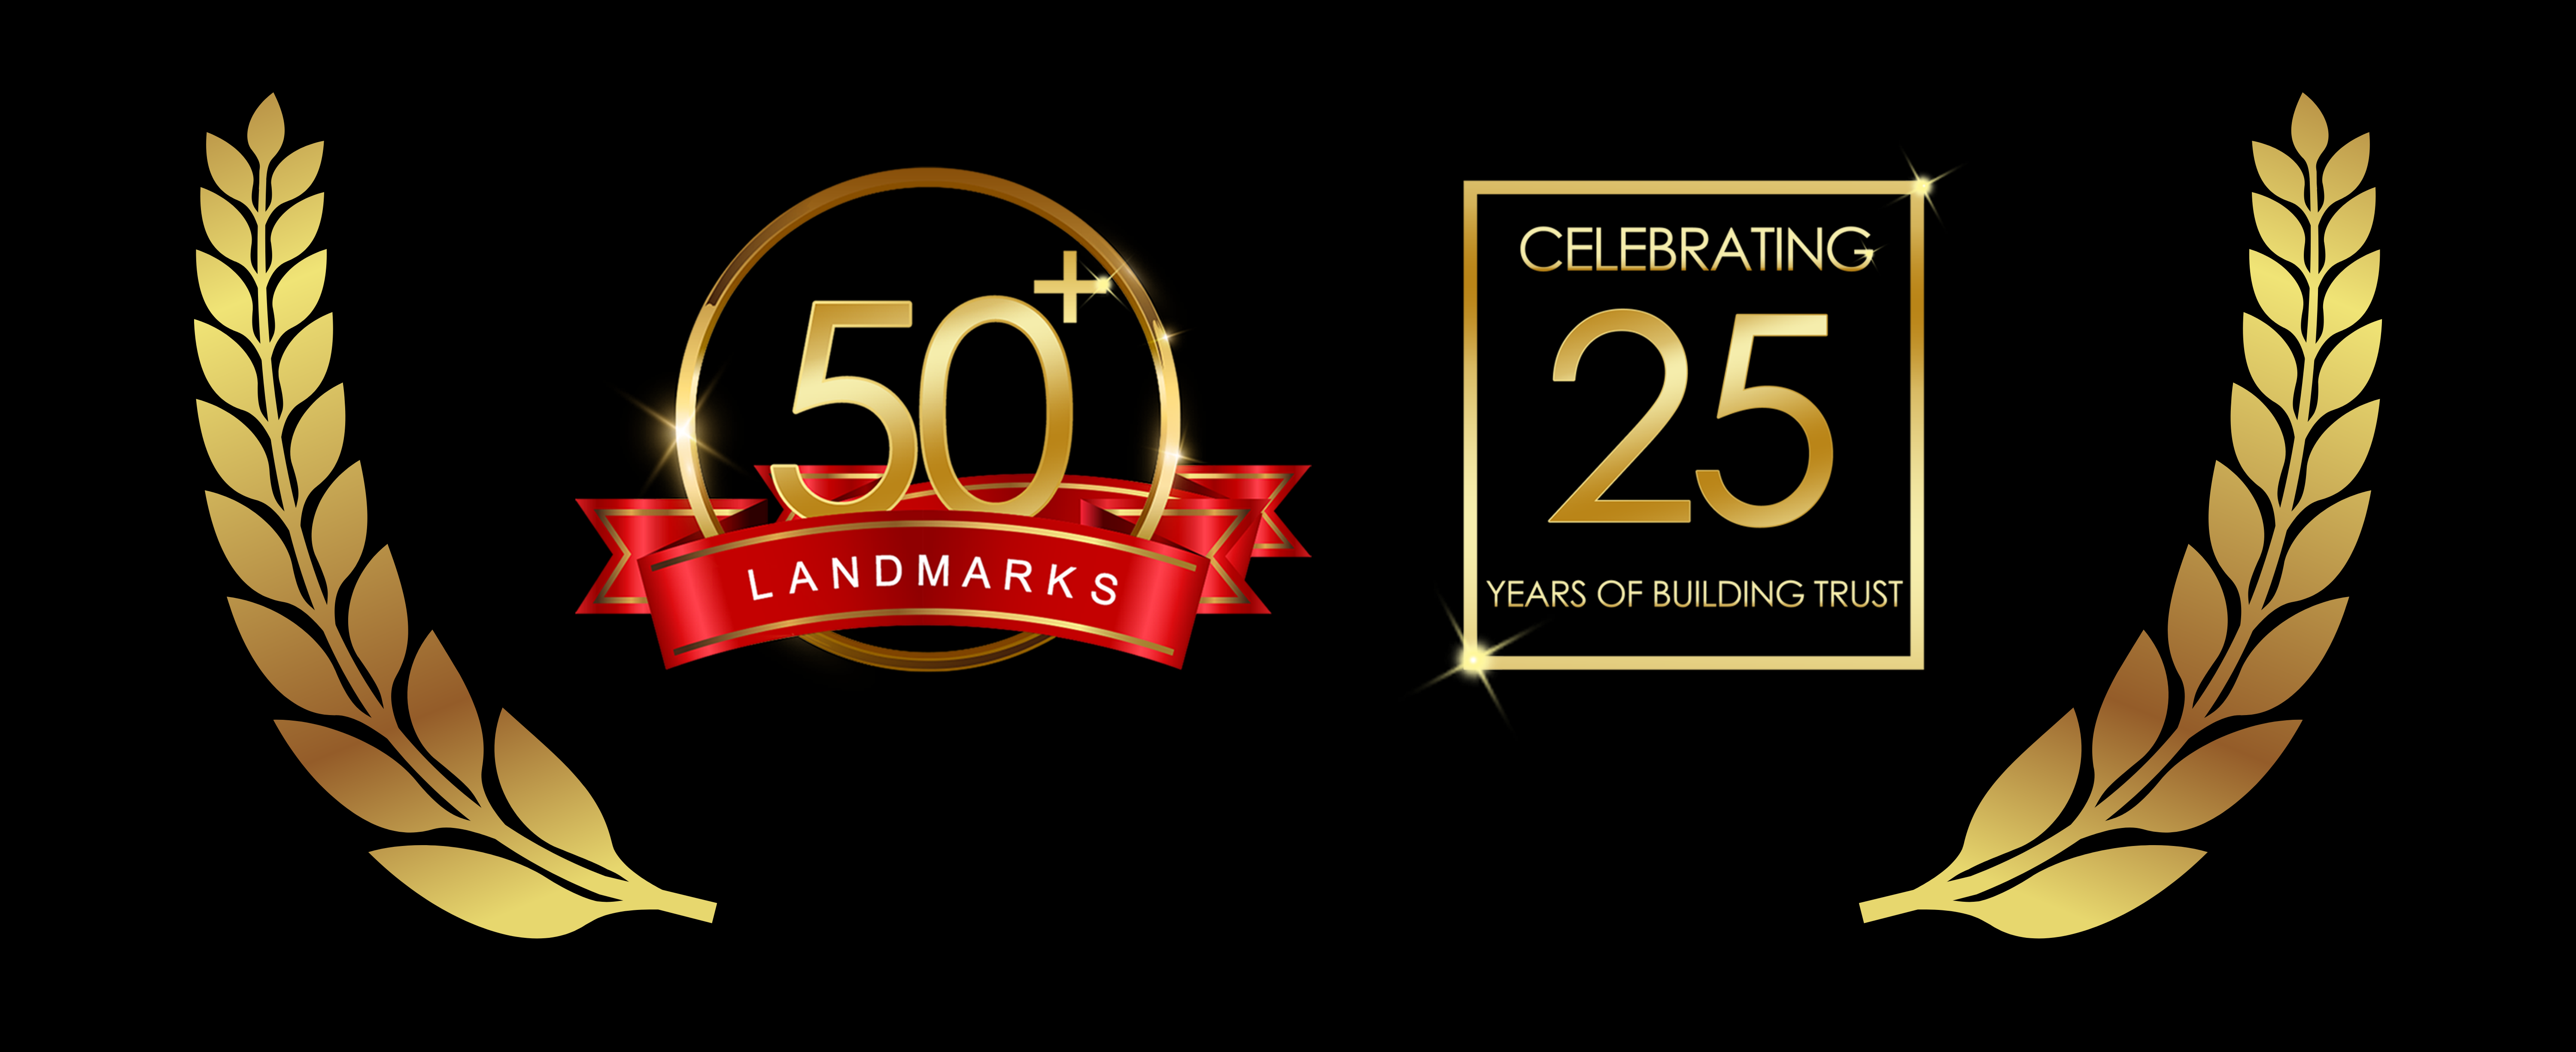 50+ Landmarks and celebrating 25 years of building trust